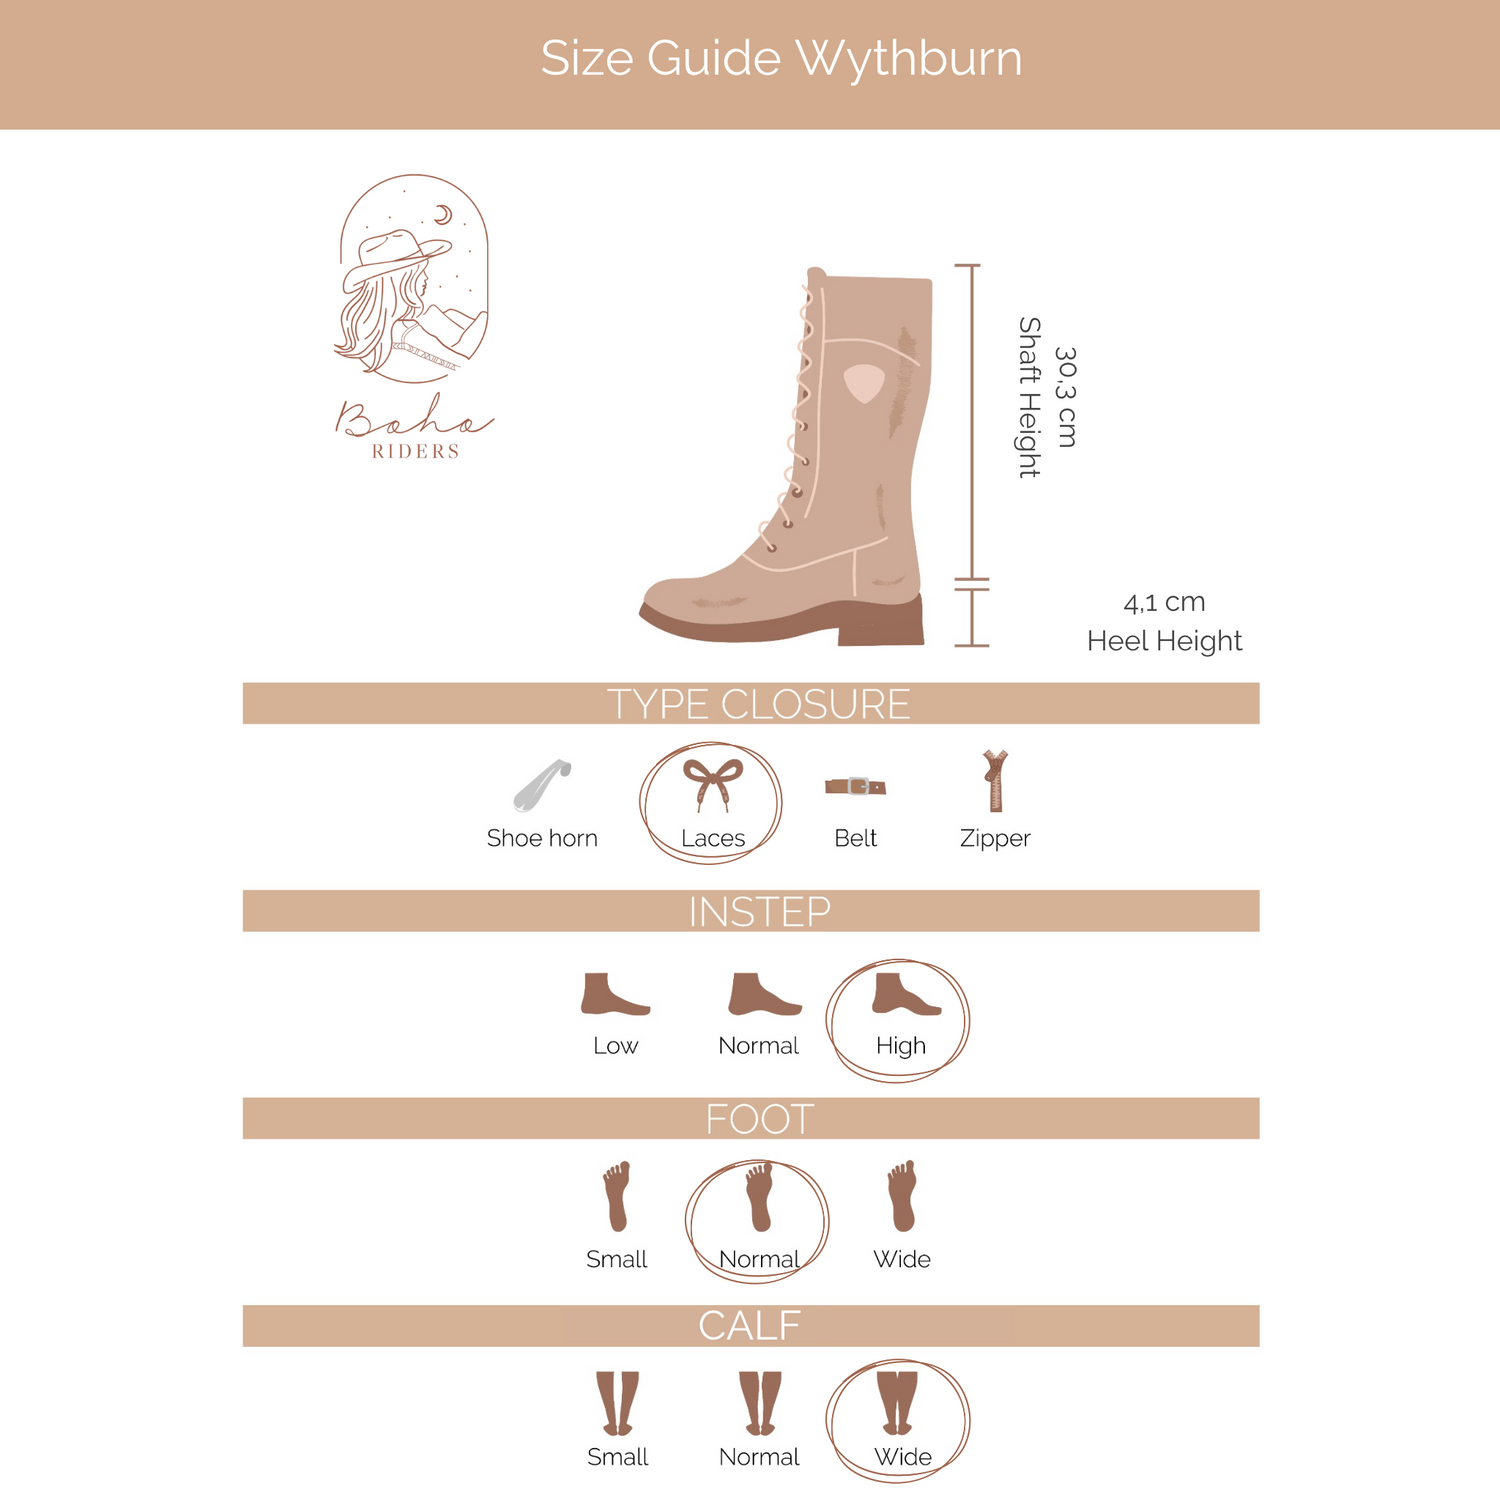 What you want to know about the fit ofAriat Wythburn H2O Waterproof - Riding Boots - Outdoor Boots - Wheatered Brown 